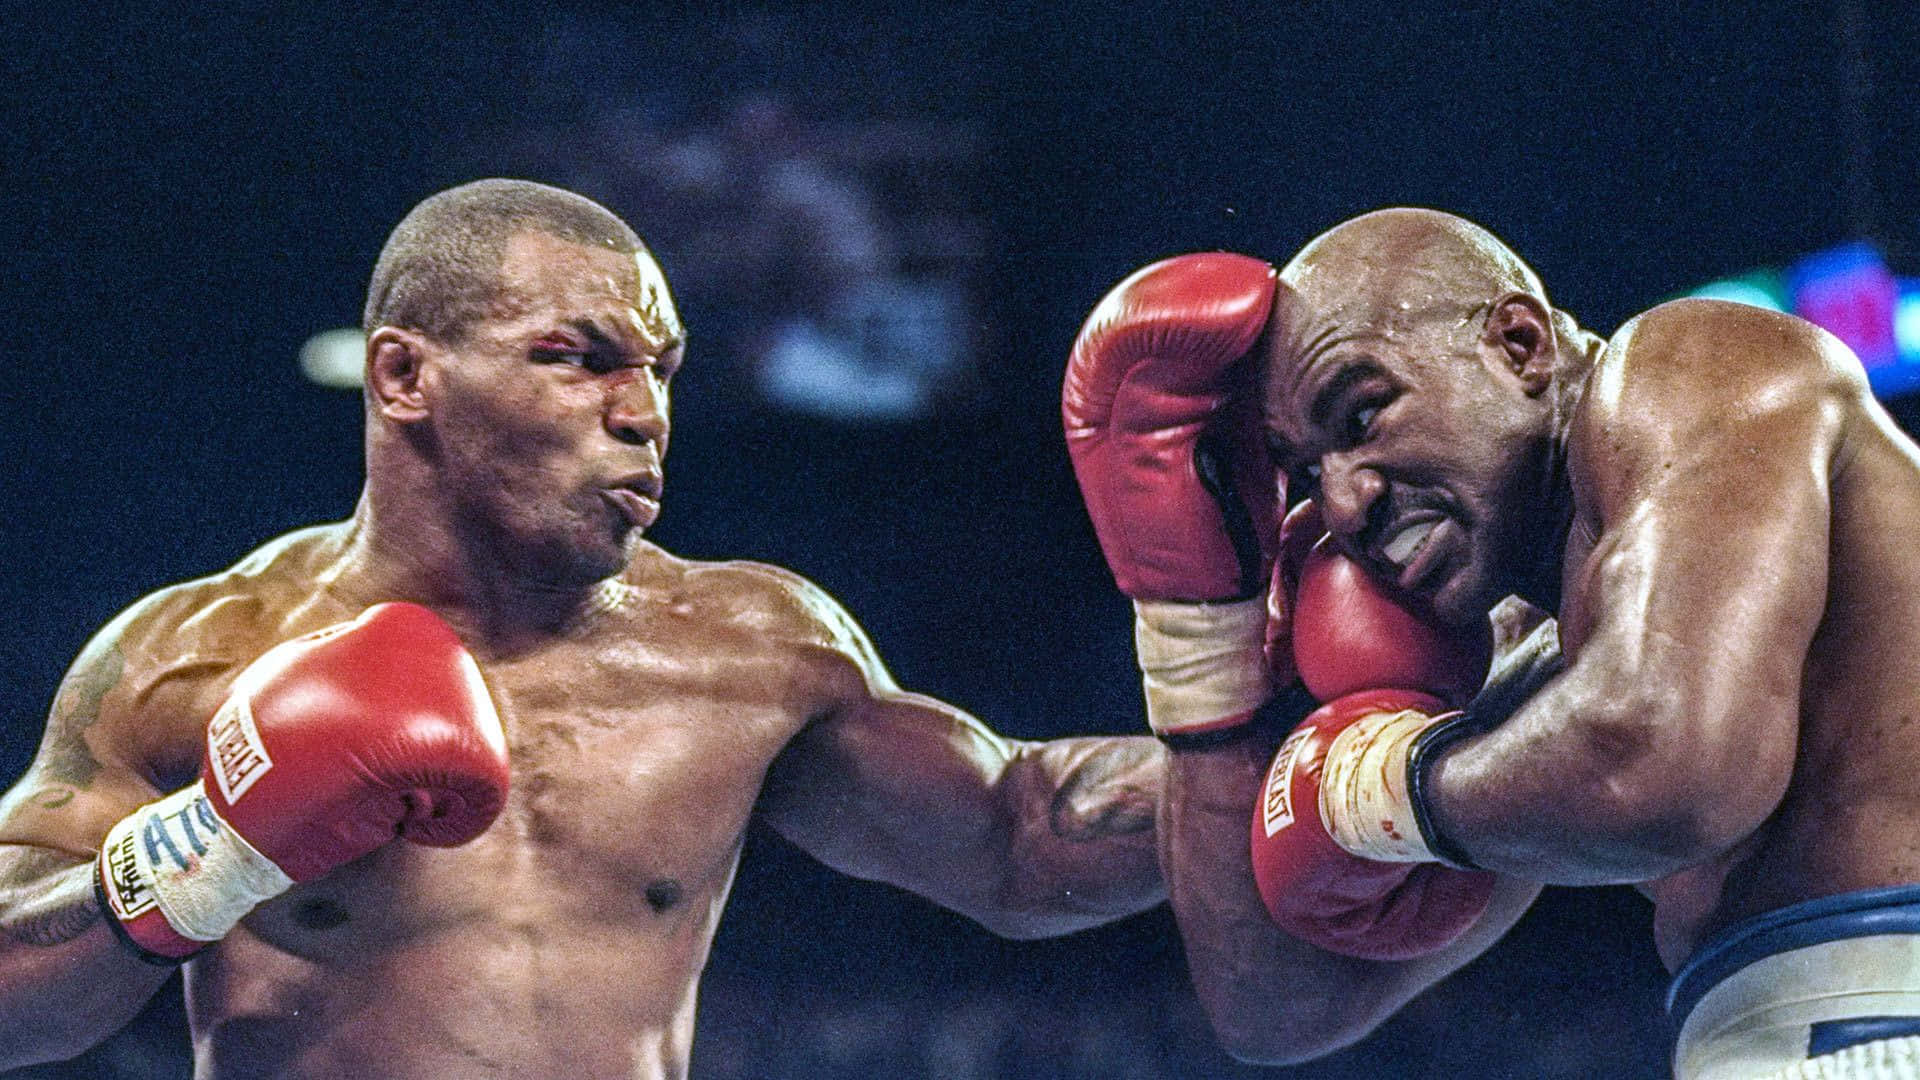 Boxing legend Mike Tyson in action